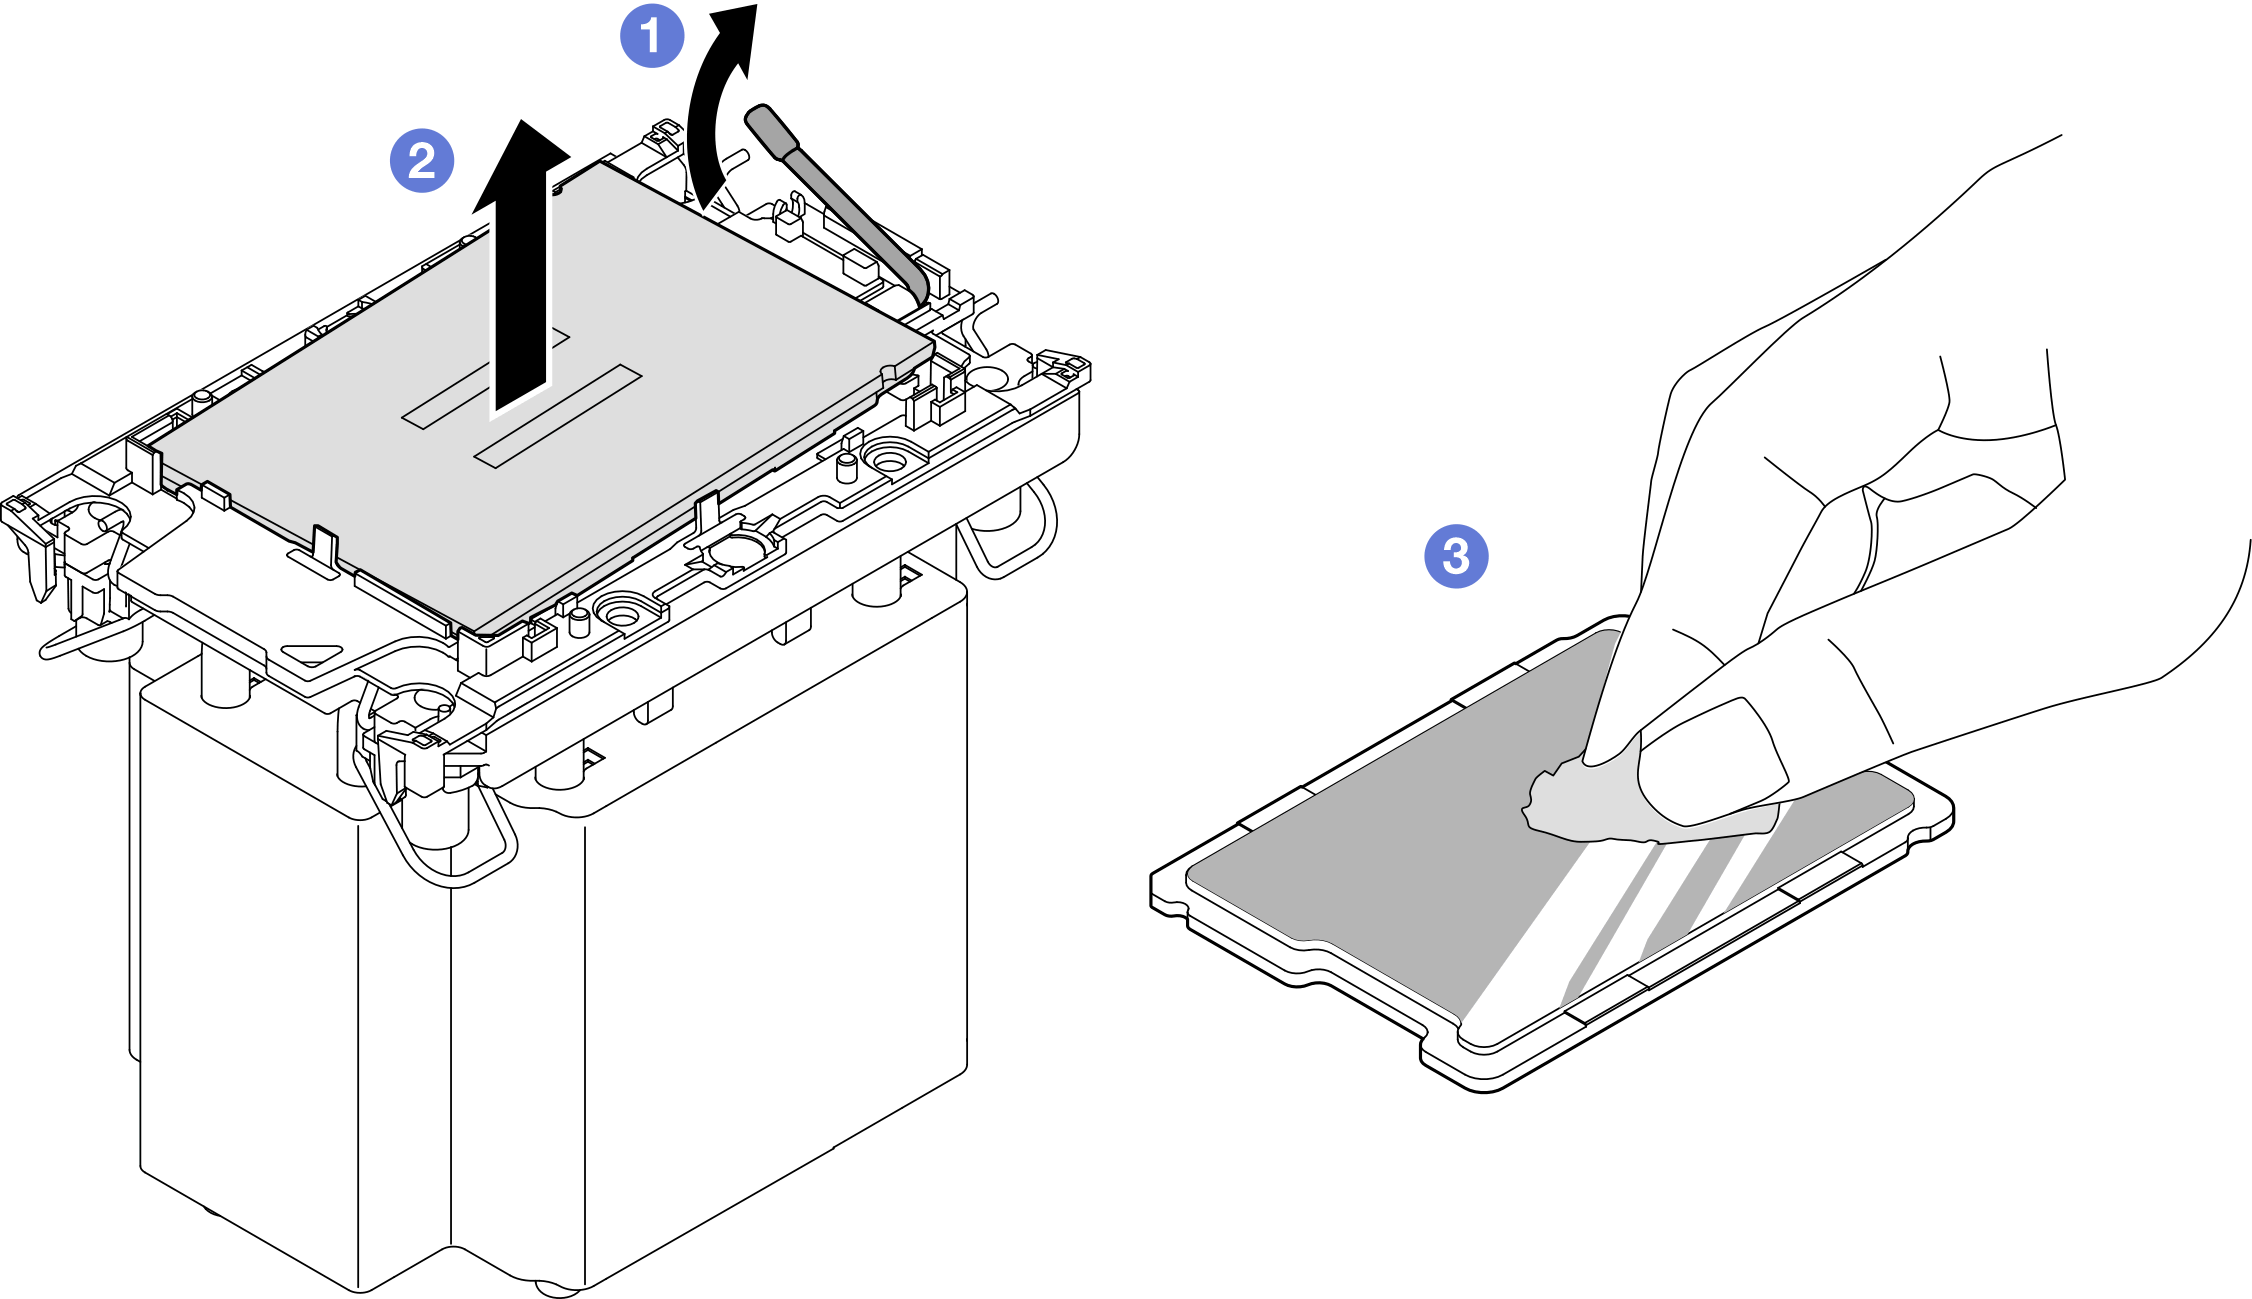 Separating a processor from the heat sink and carrier